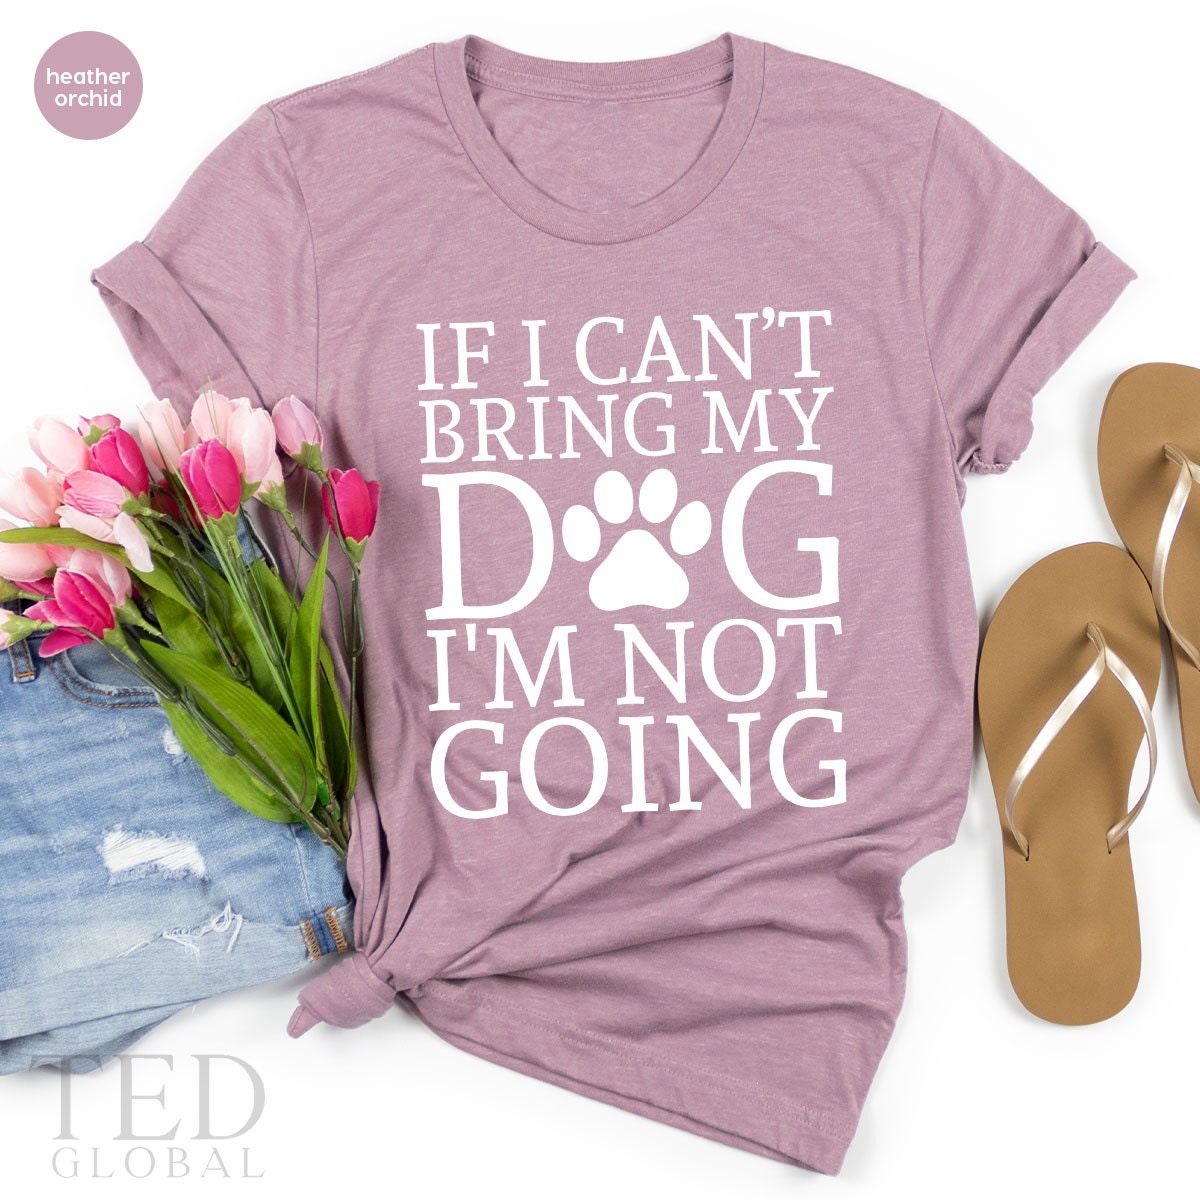 Dog Lover Shirt, If I Can't Bring My Dog I'm Not Going Shirt, Dog Owner T  Shirt, Funny Dog TShirt, Fur Mama Shirt, Gift For Dog Owners - Fastdeliverytees.com